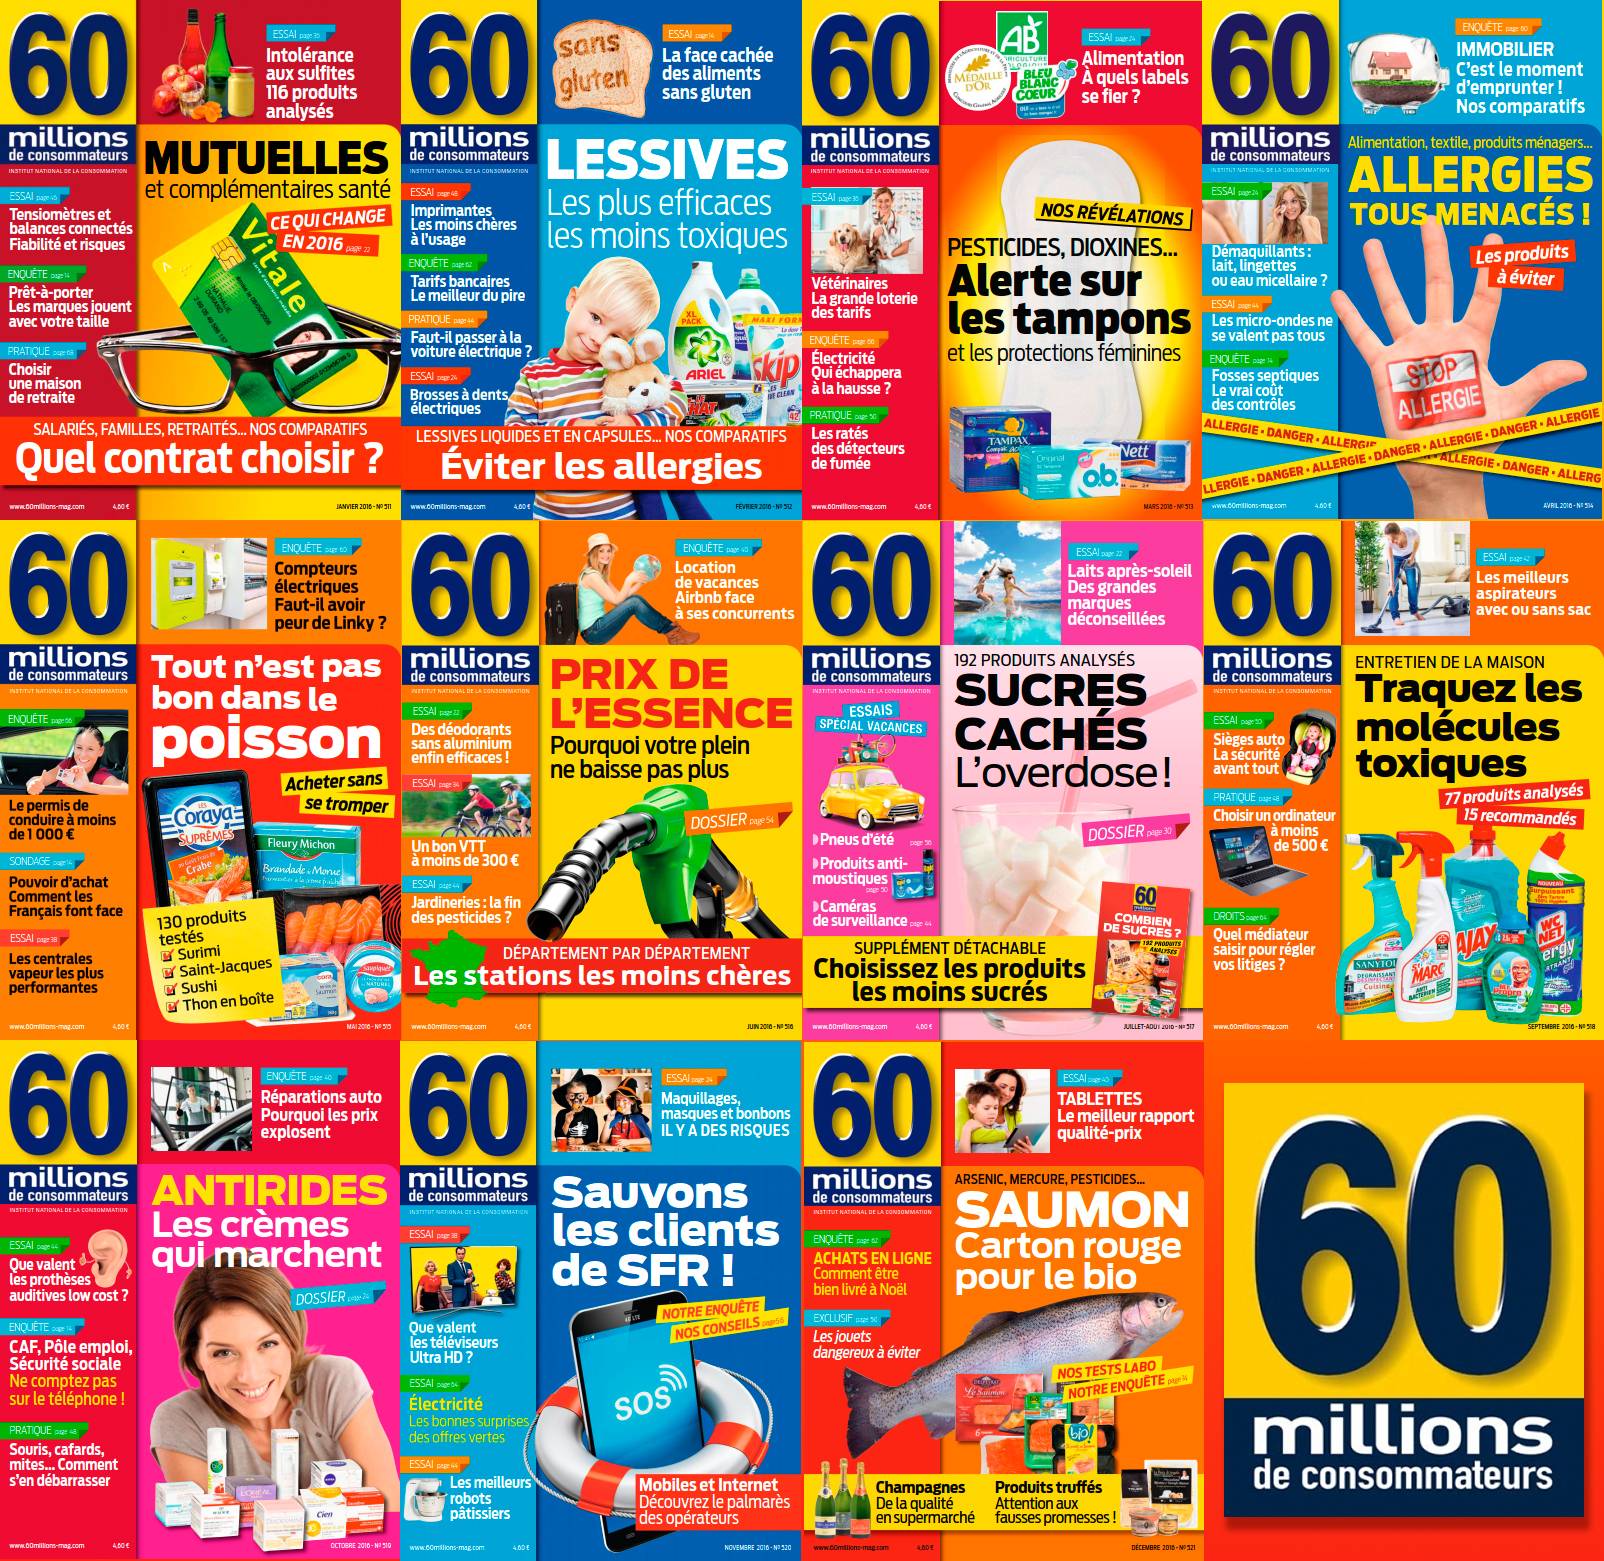 60 millions de consommateurs - Full Year 2016 Collection 